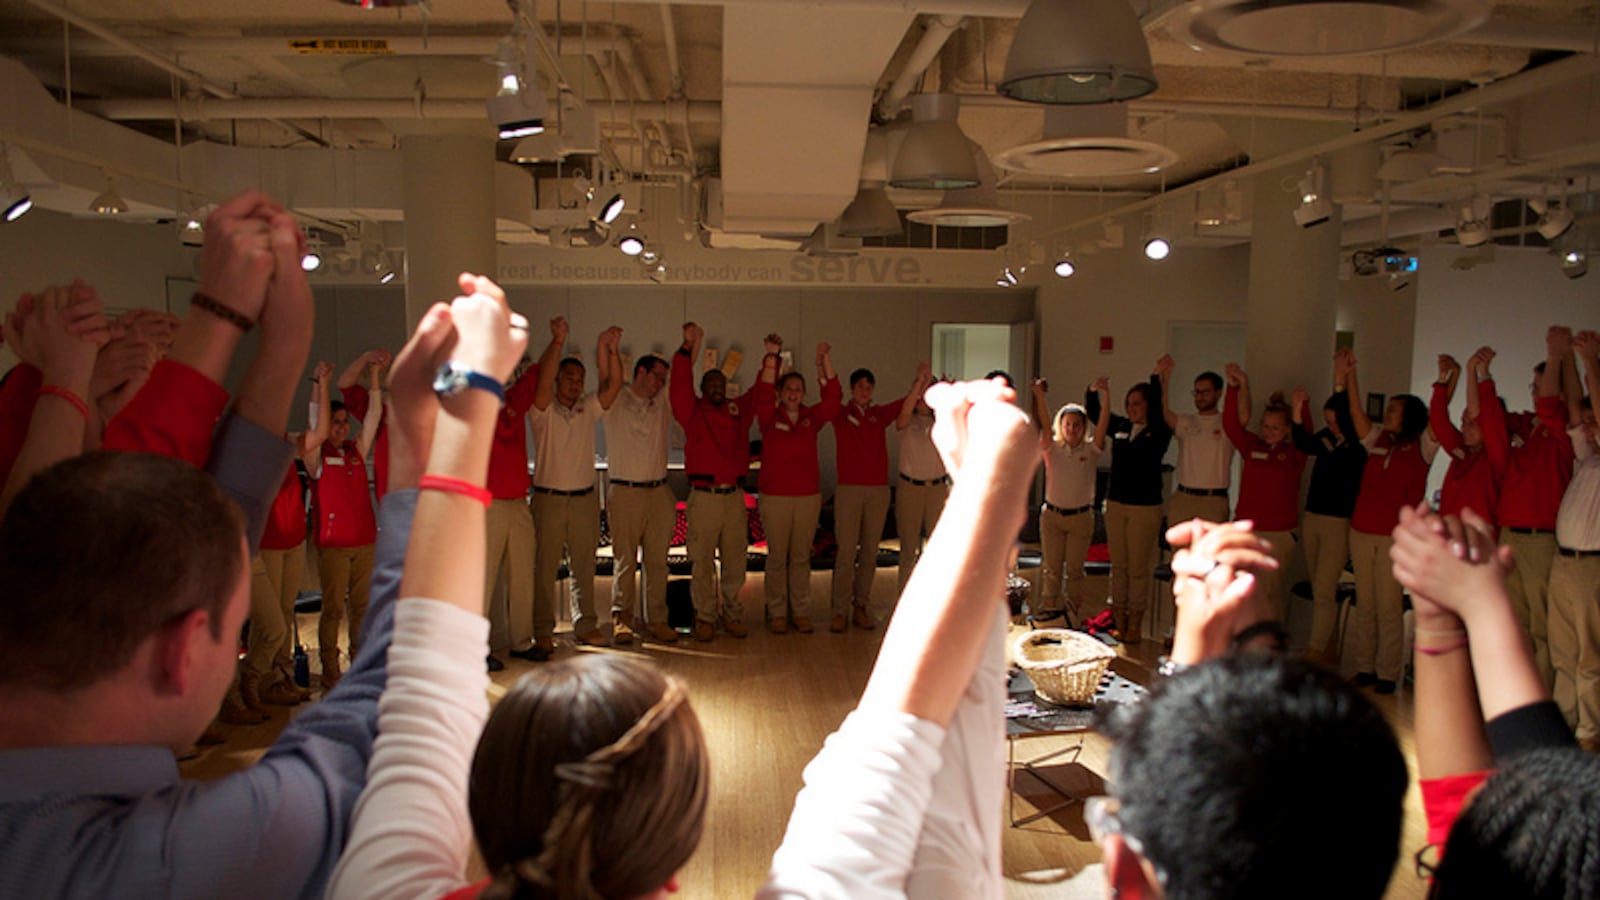 City Year volunteers participate in a group training as part of their preparation for working with students in urban, high-poverty communities.